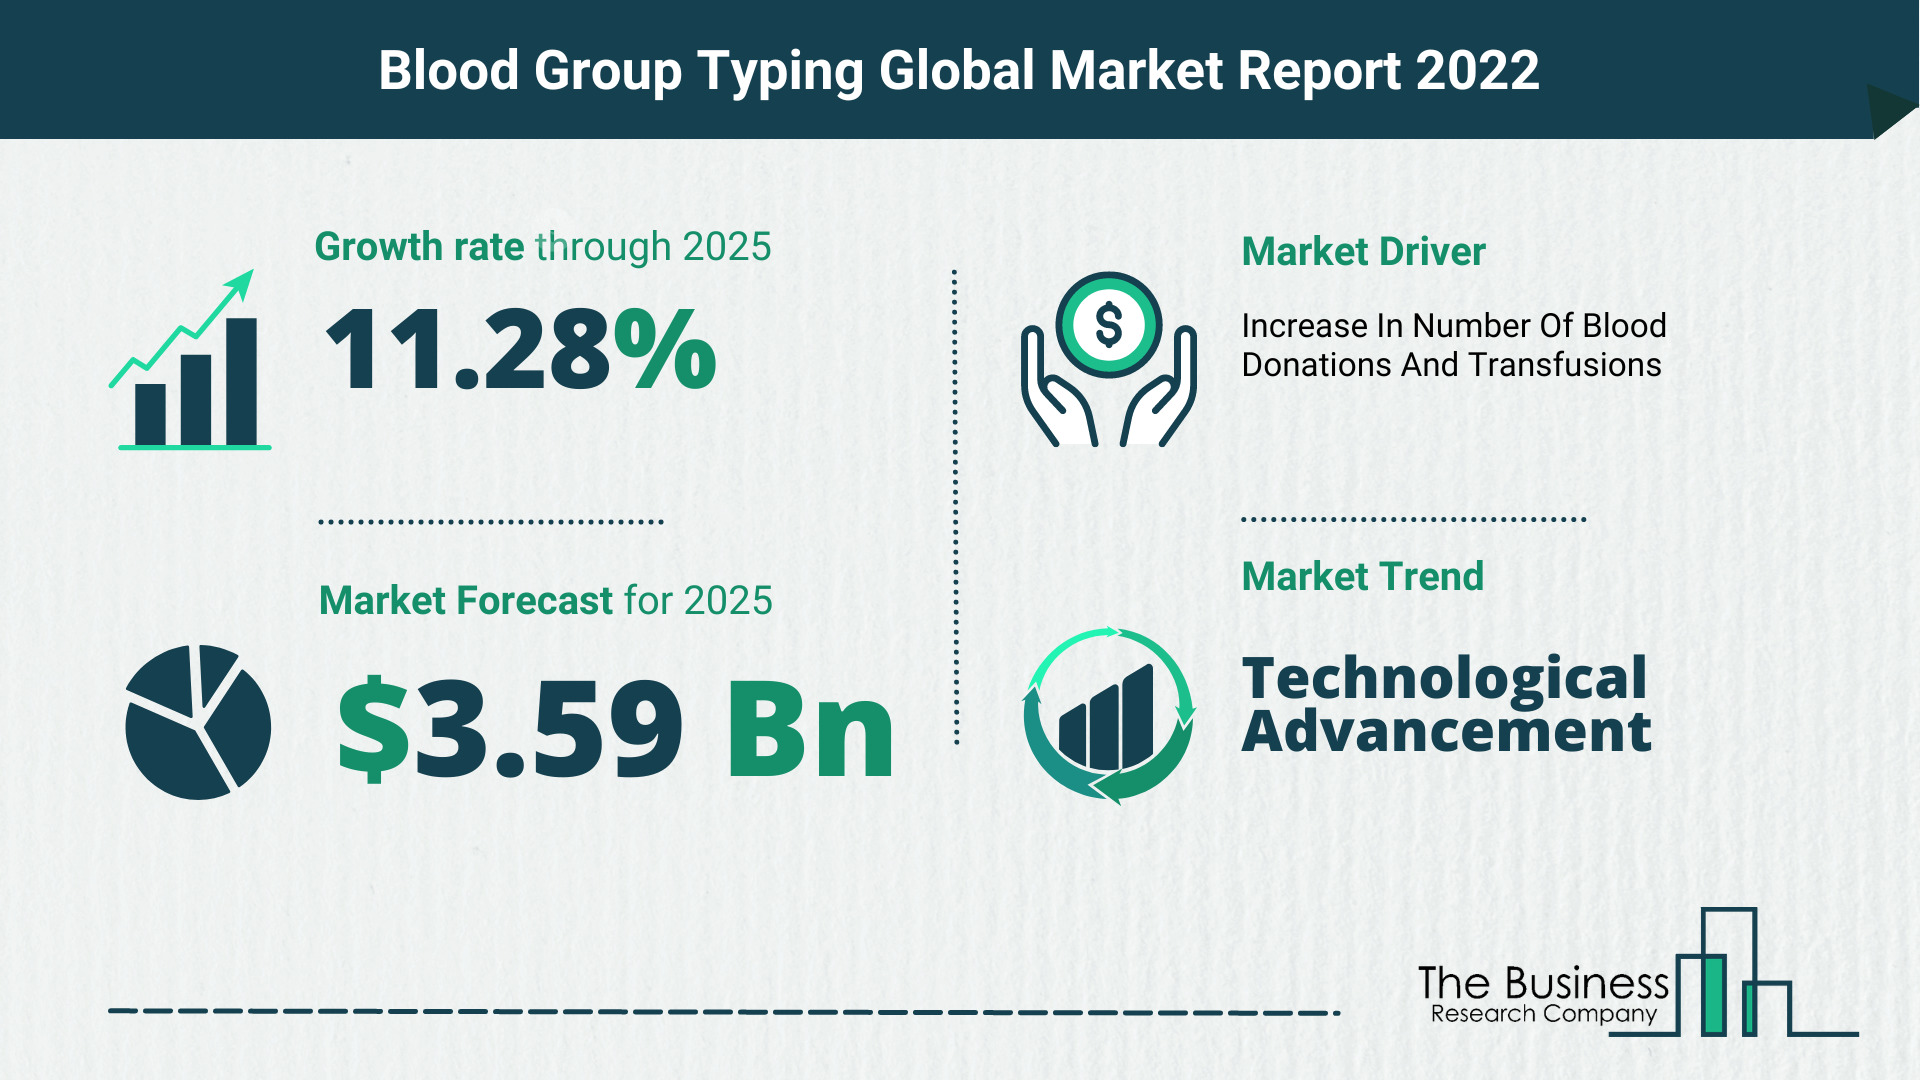 Latest Blood Group Typing Market Growth Study 2022-2026 By The Business Research Company